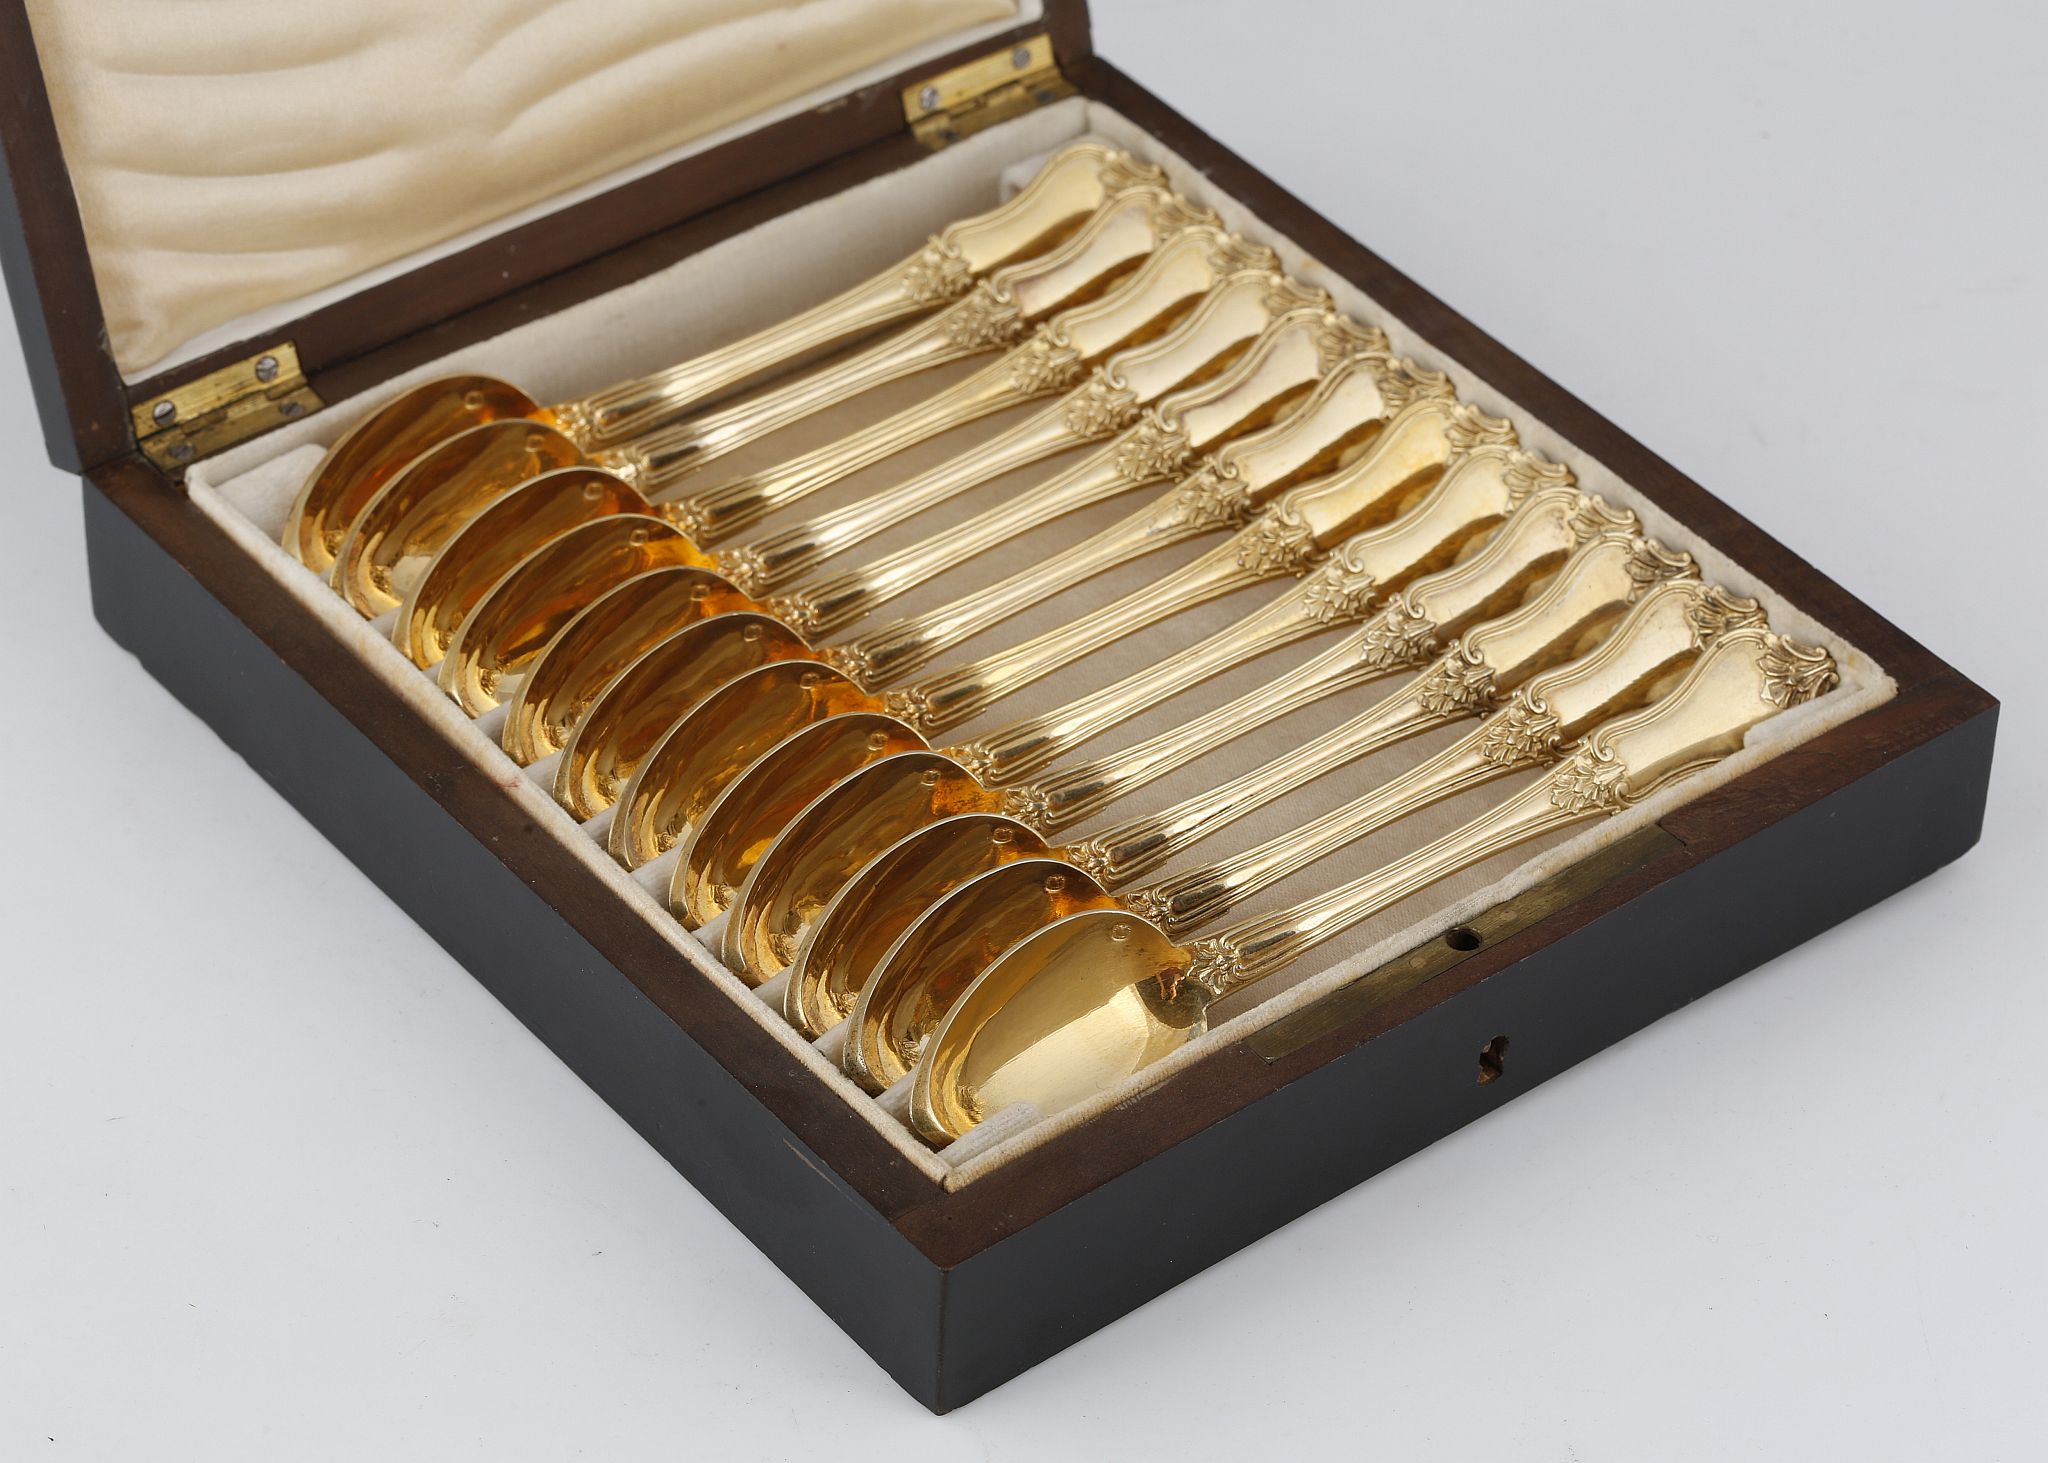 A boxed set of 12 Antique French Silver gilt teaspoons by Philippe Berthier, Paris c1845.